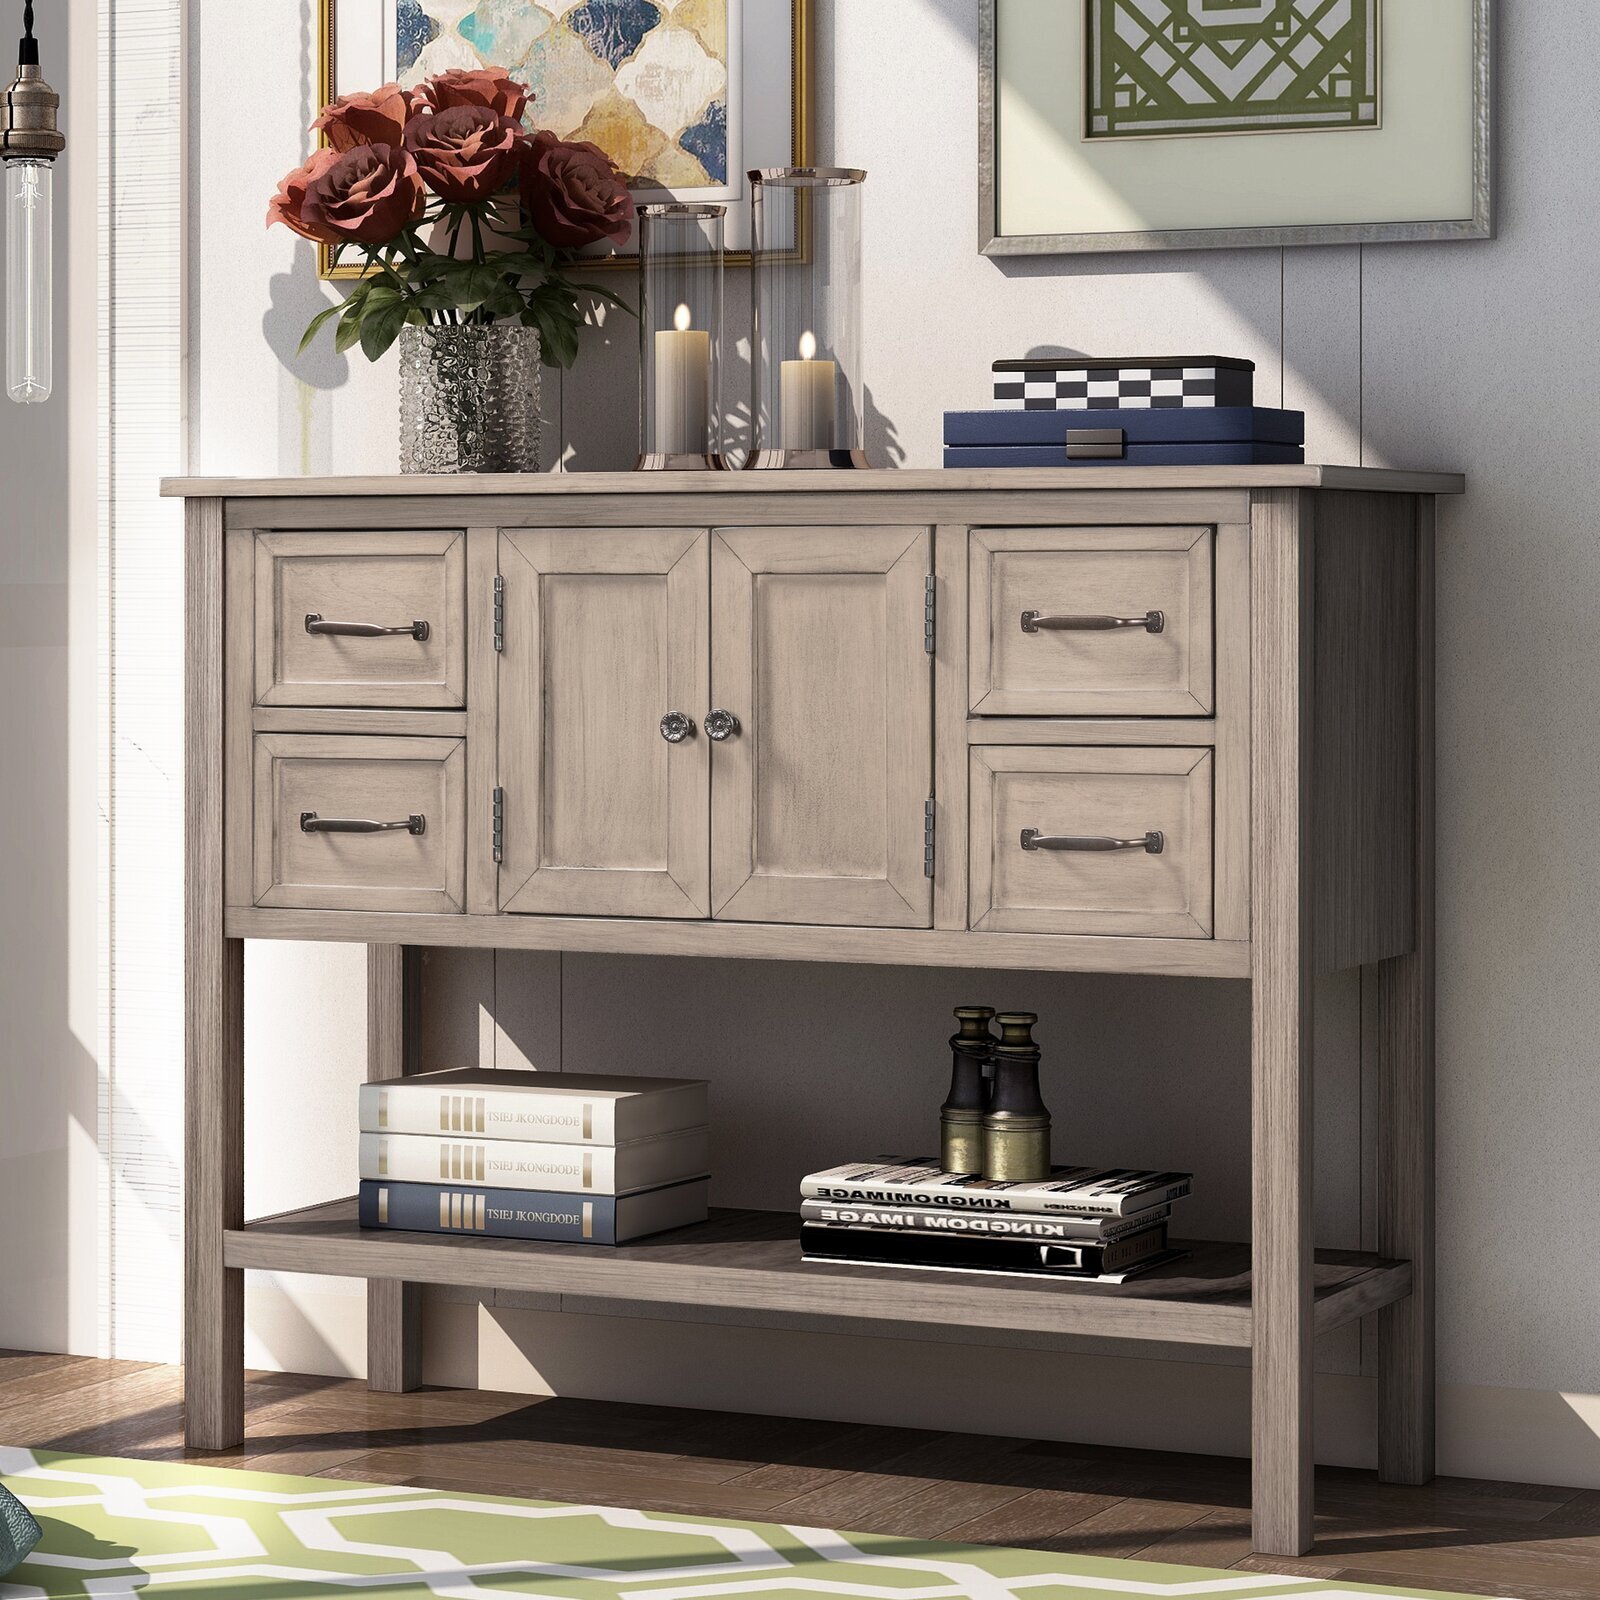 A greyscale narrow depth sideboard with an aged finish 